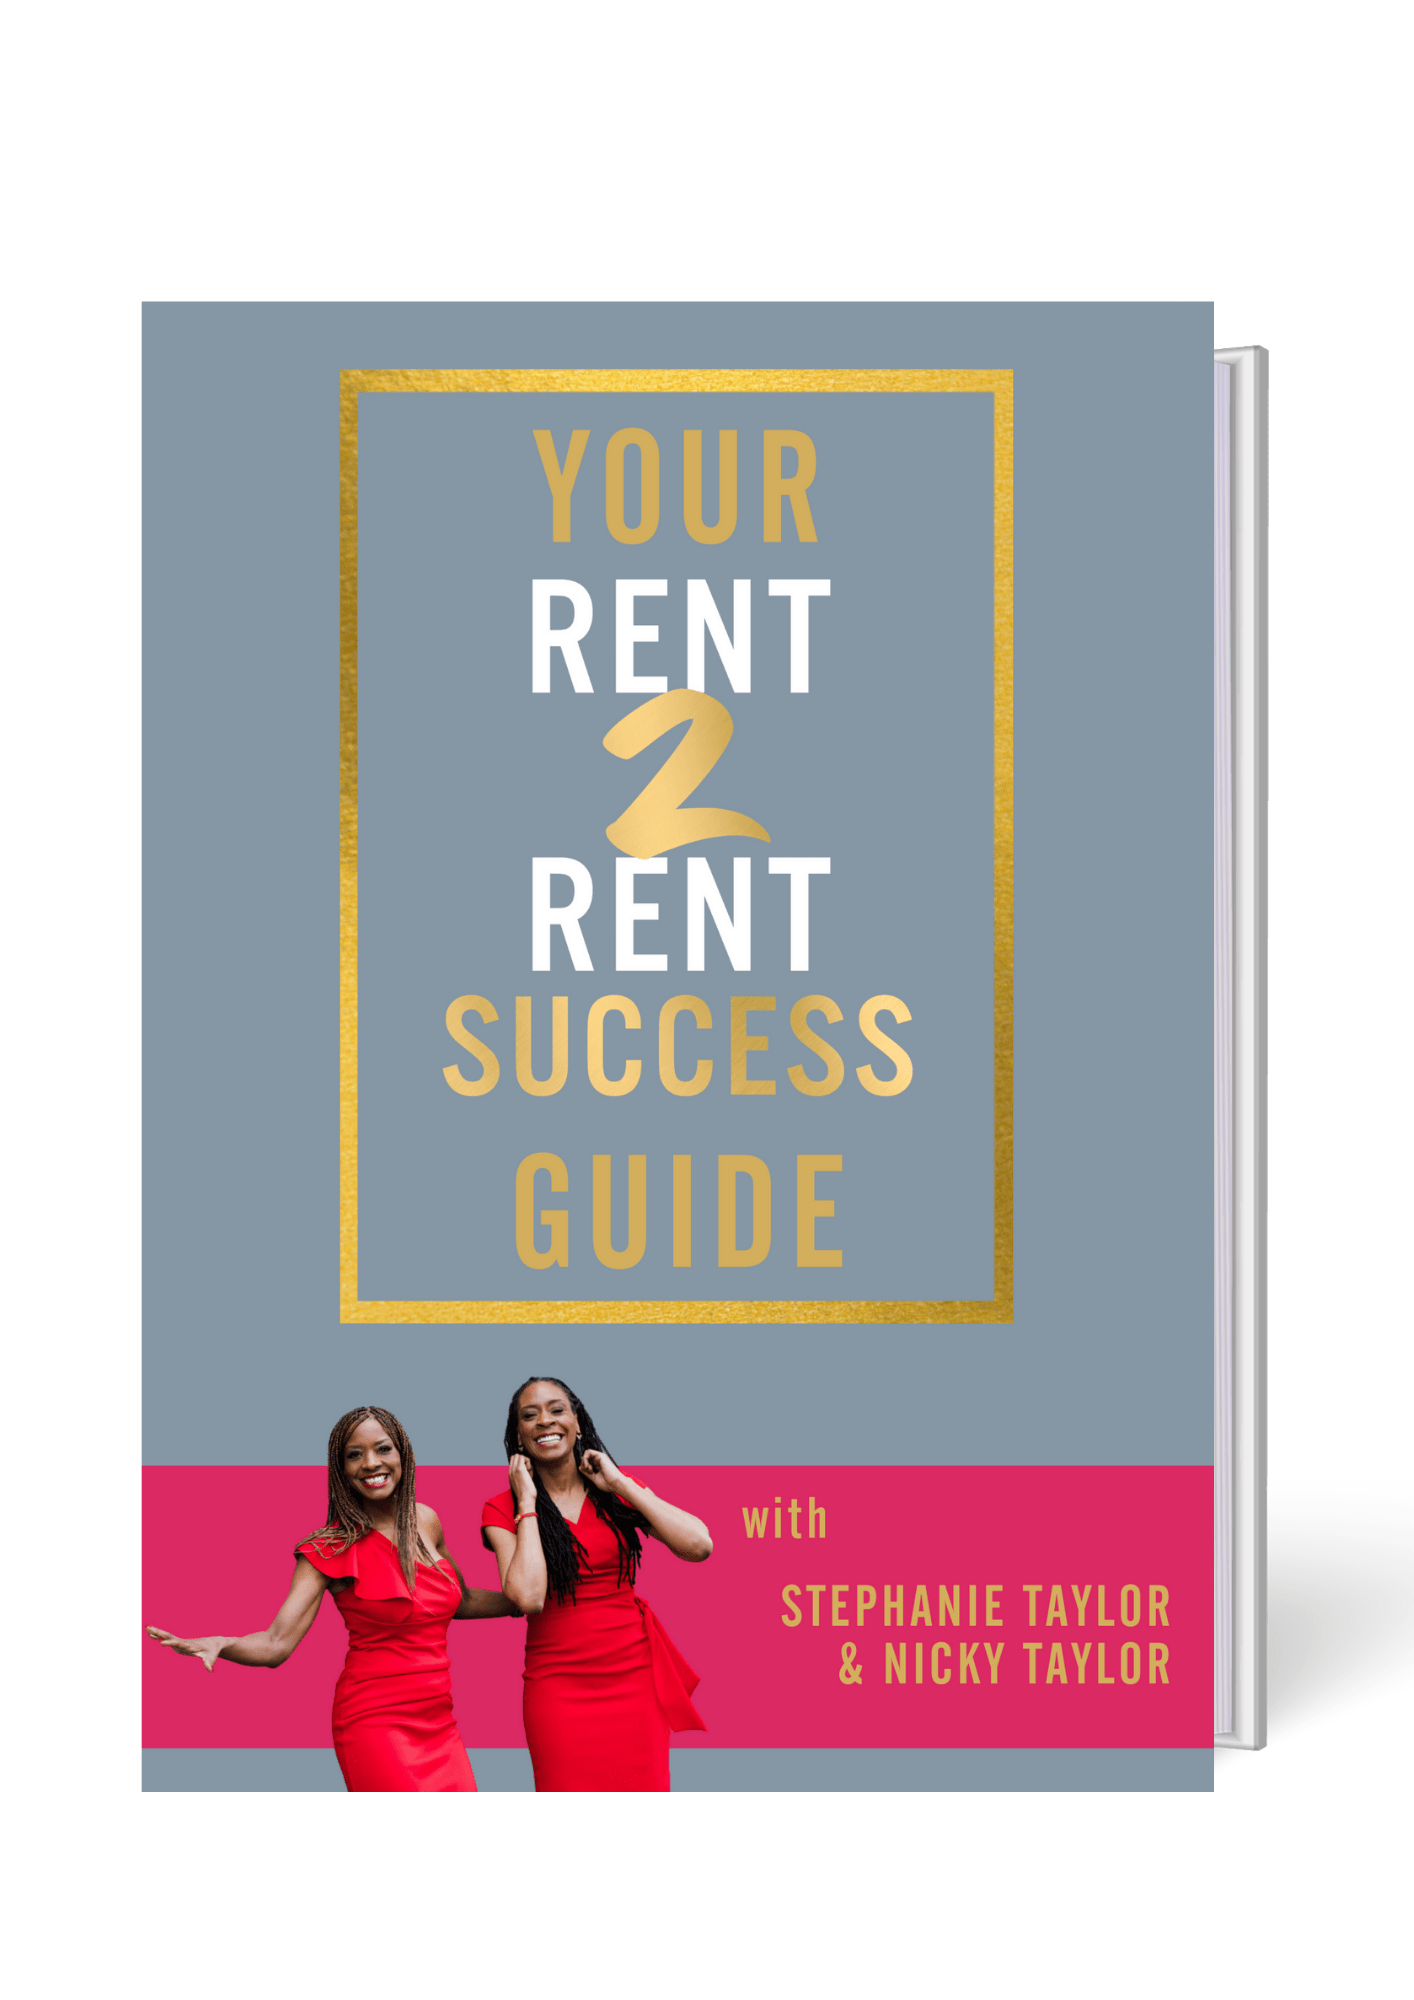 The 6 Step System to Get Your First Rent 2 Rent Deal